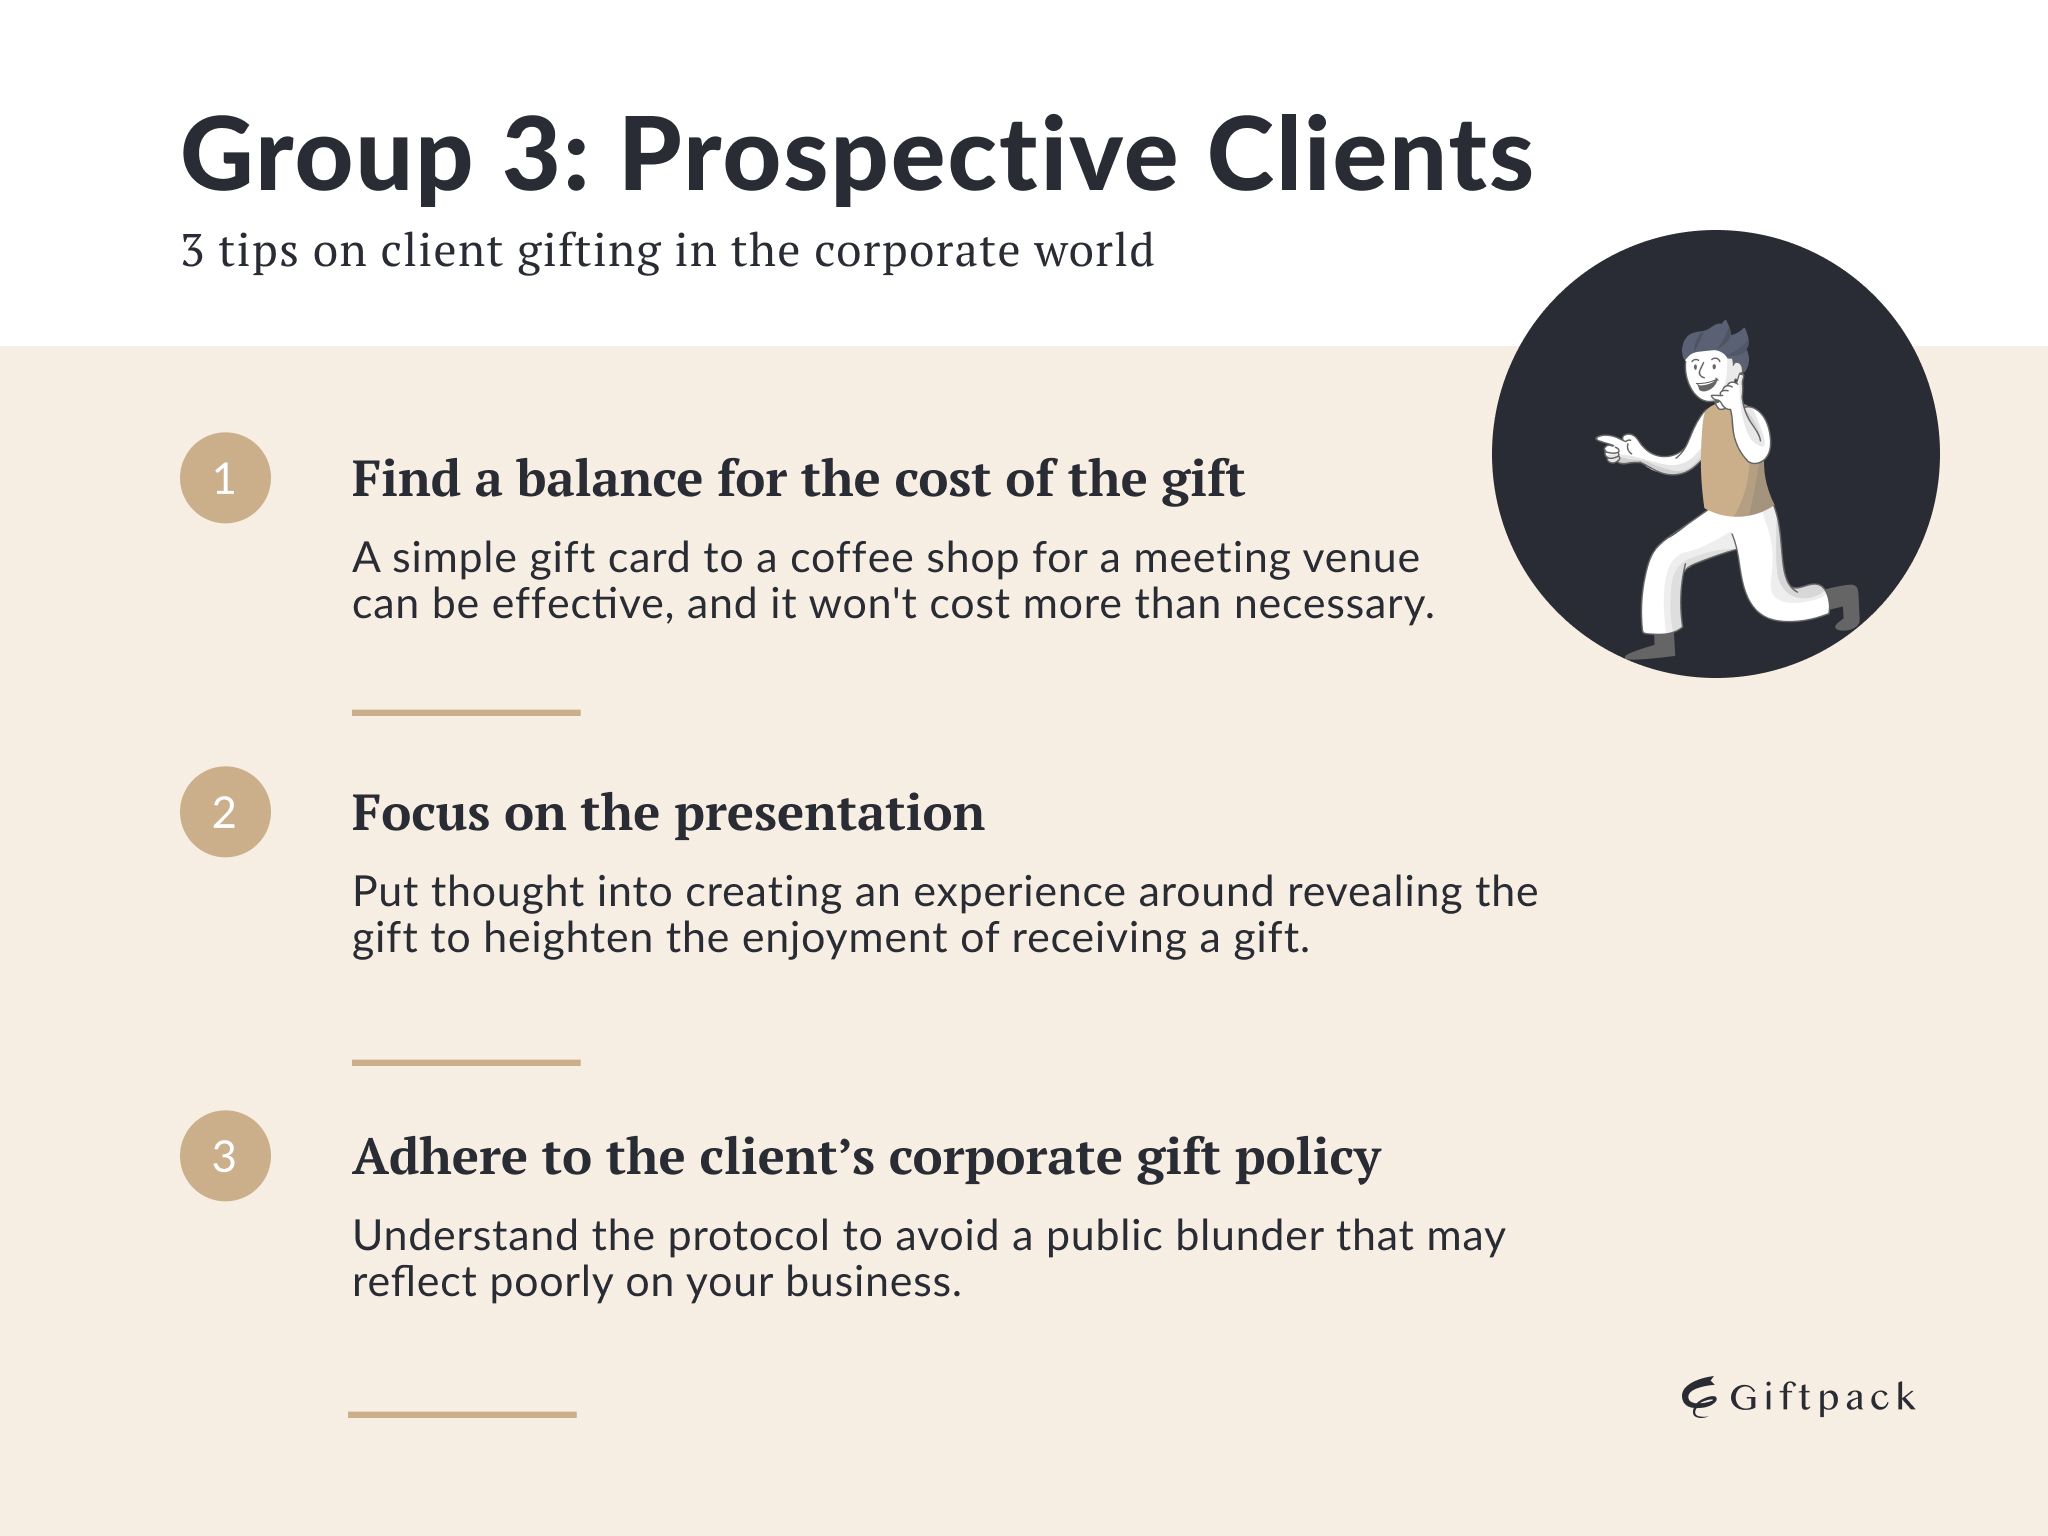 group 3 and tips on prospective clients gifting